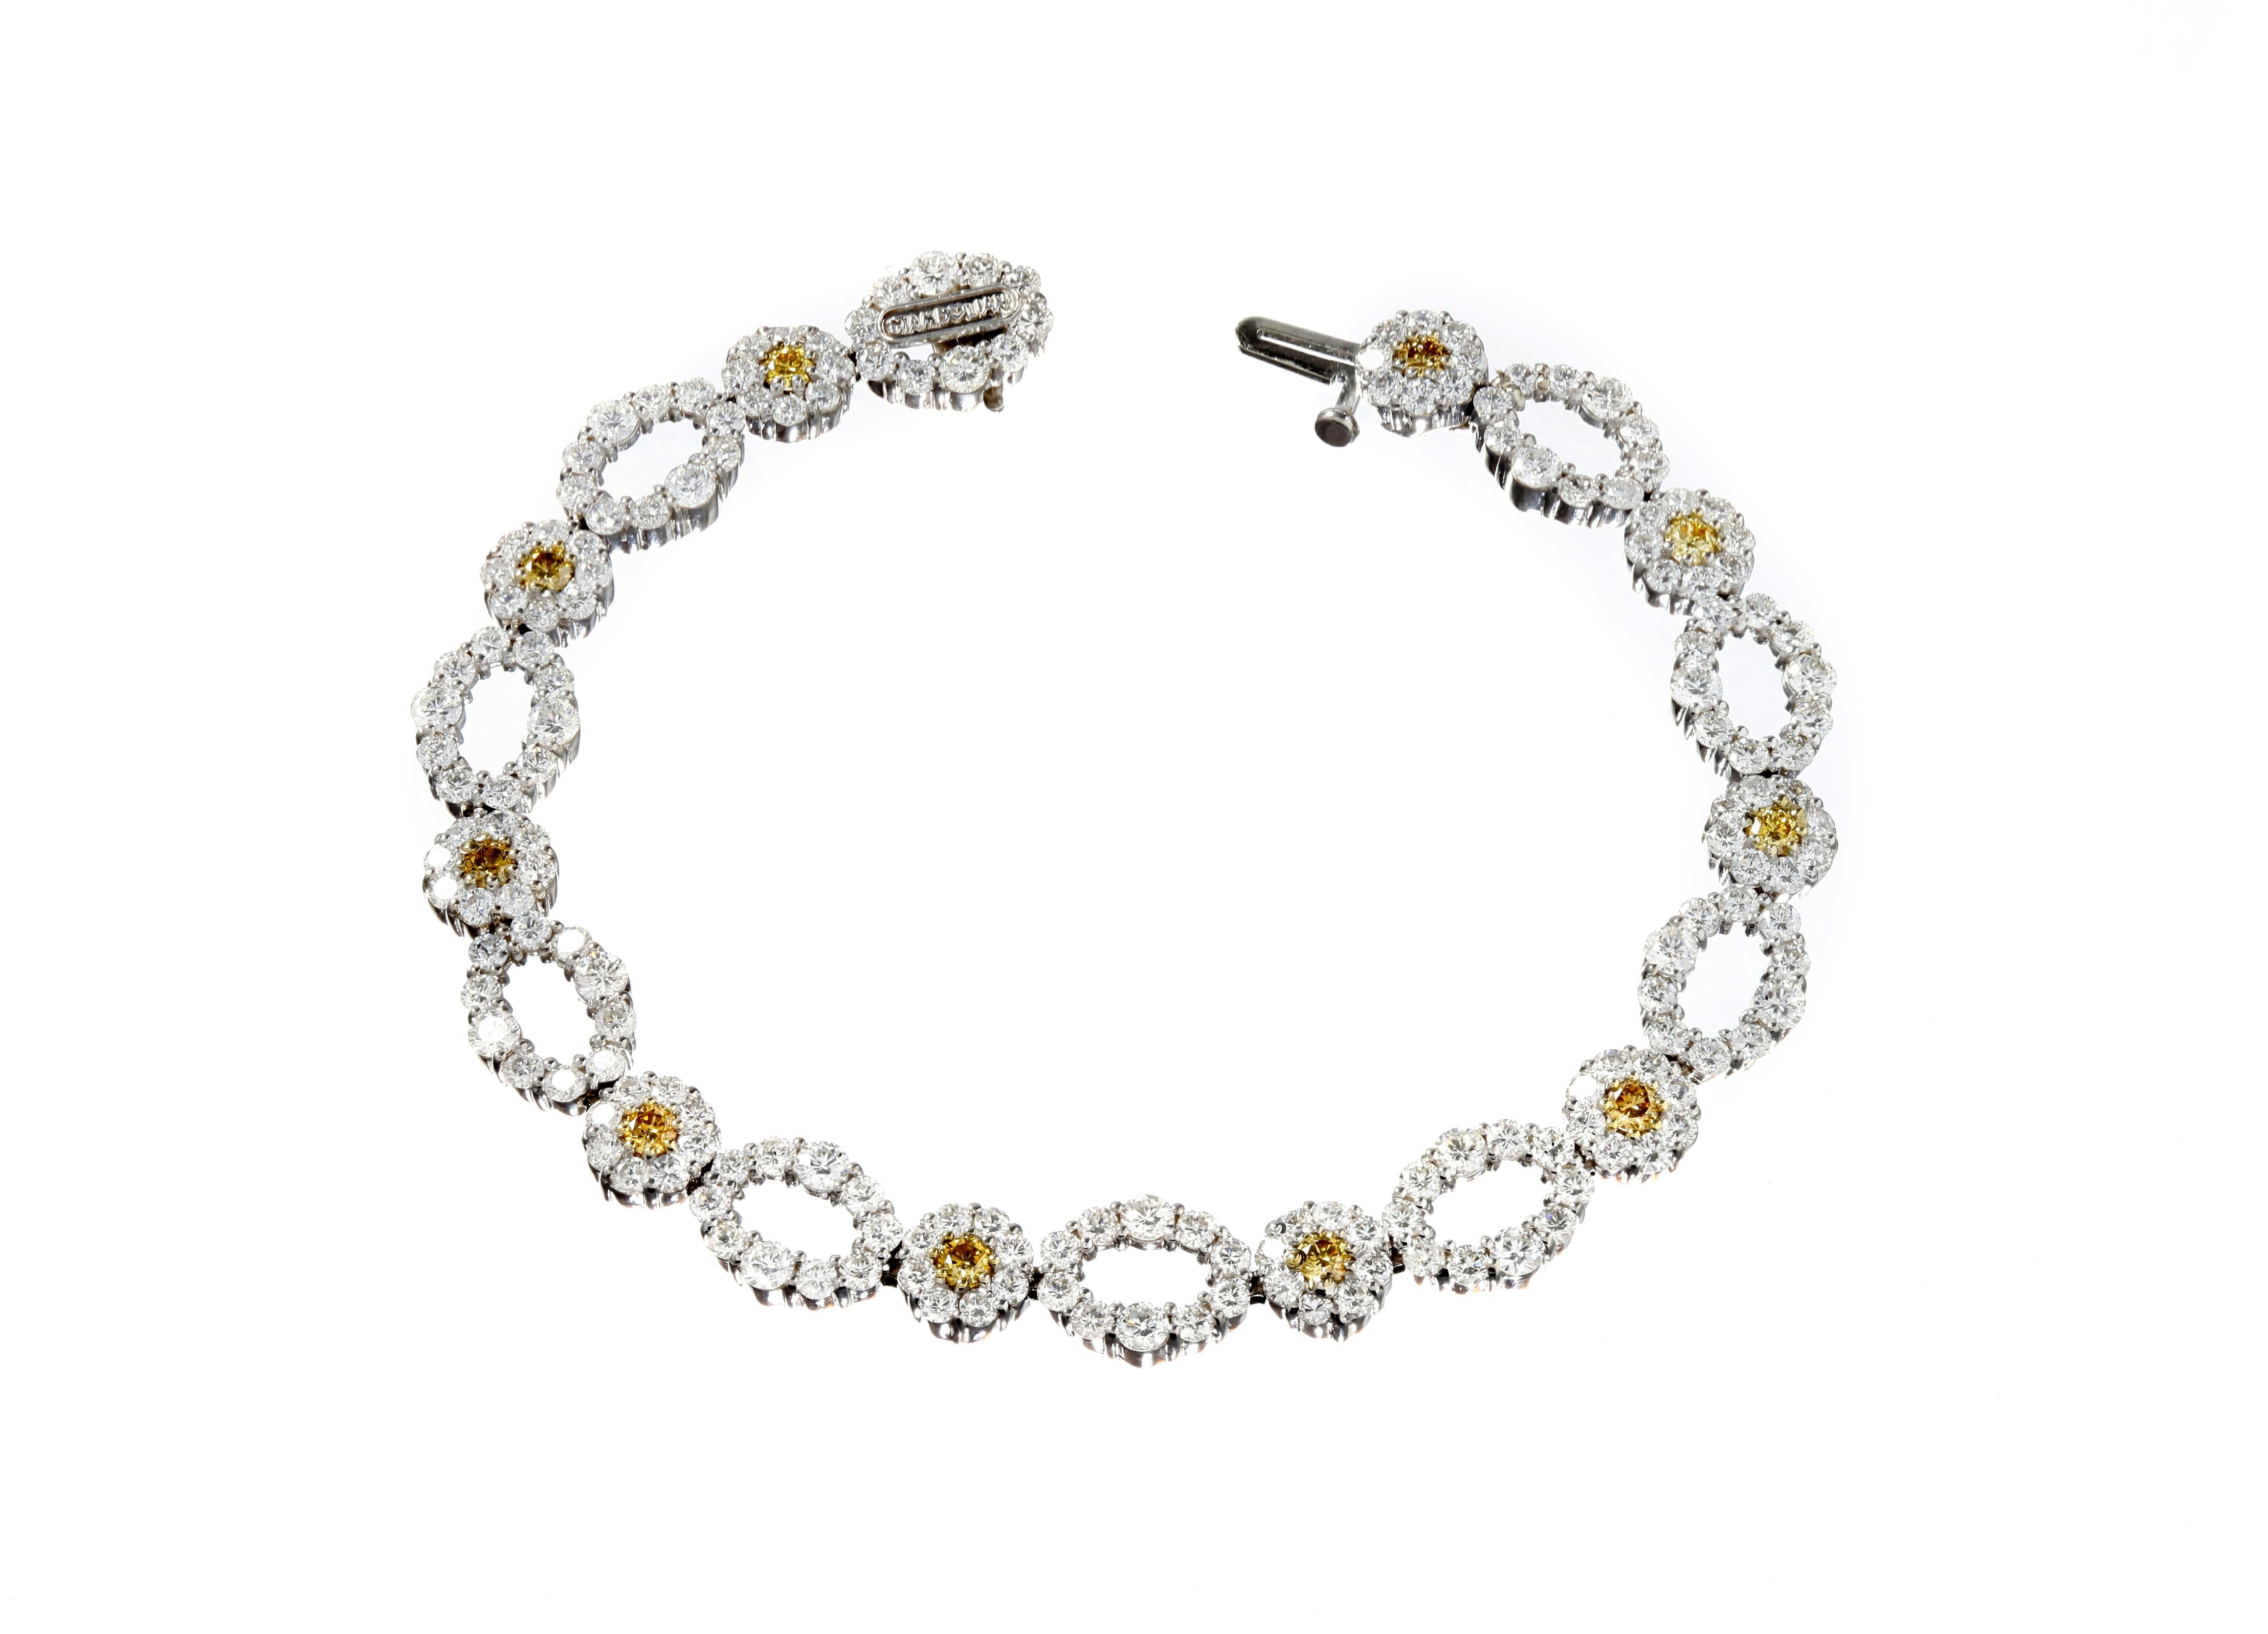 18K White Gold Link Bracelet with White and Yellow Diamonds by Stambolian 

Bracelet has 7.98 carat G color, VS clarity white diamonds
1.00 carat Yellow Diamonds

10 Yellow diamonds make up this bracelet with the rest being white diamonds

Bracelet